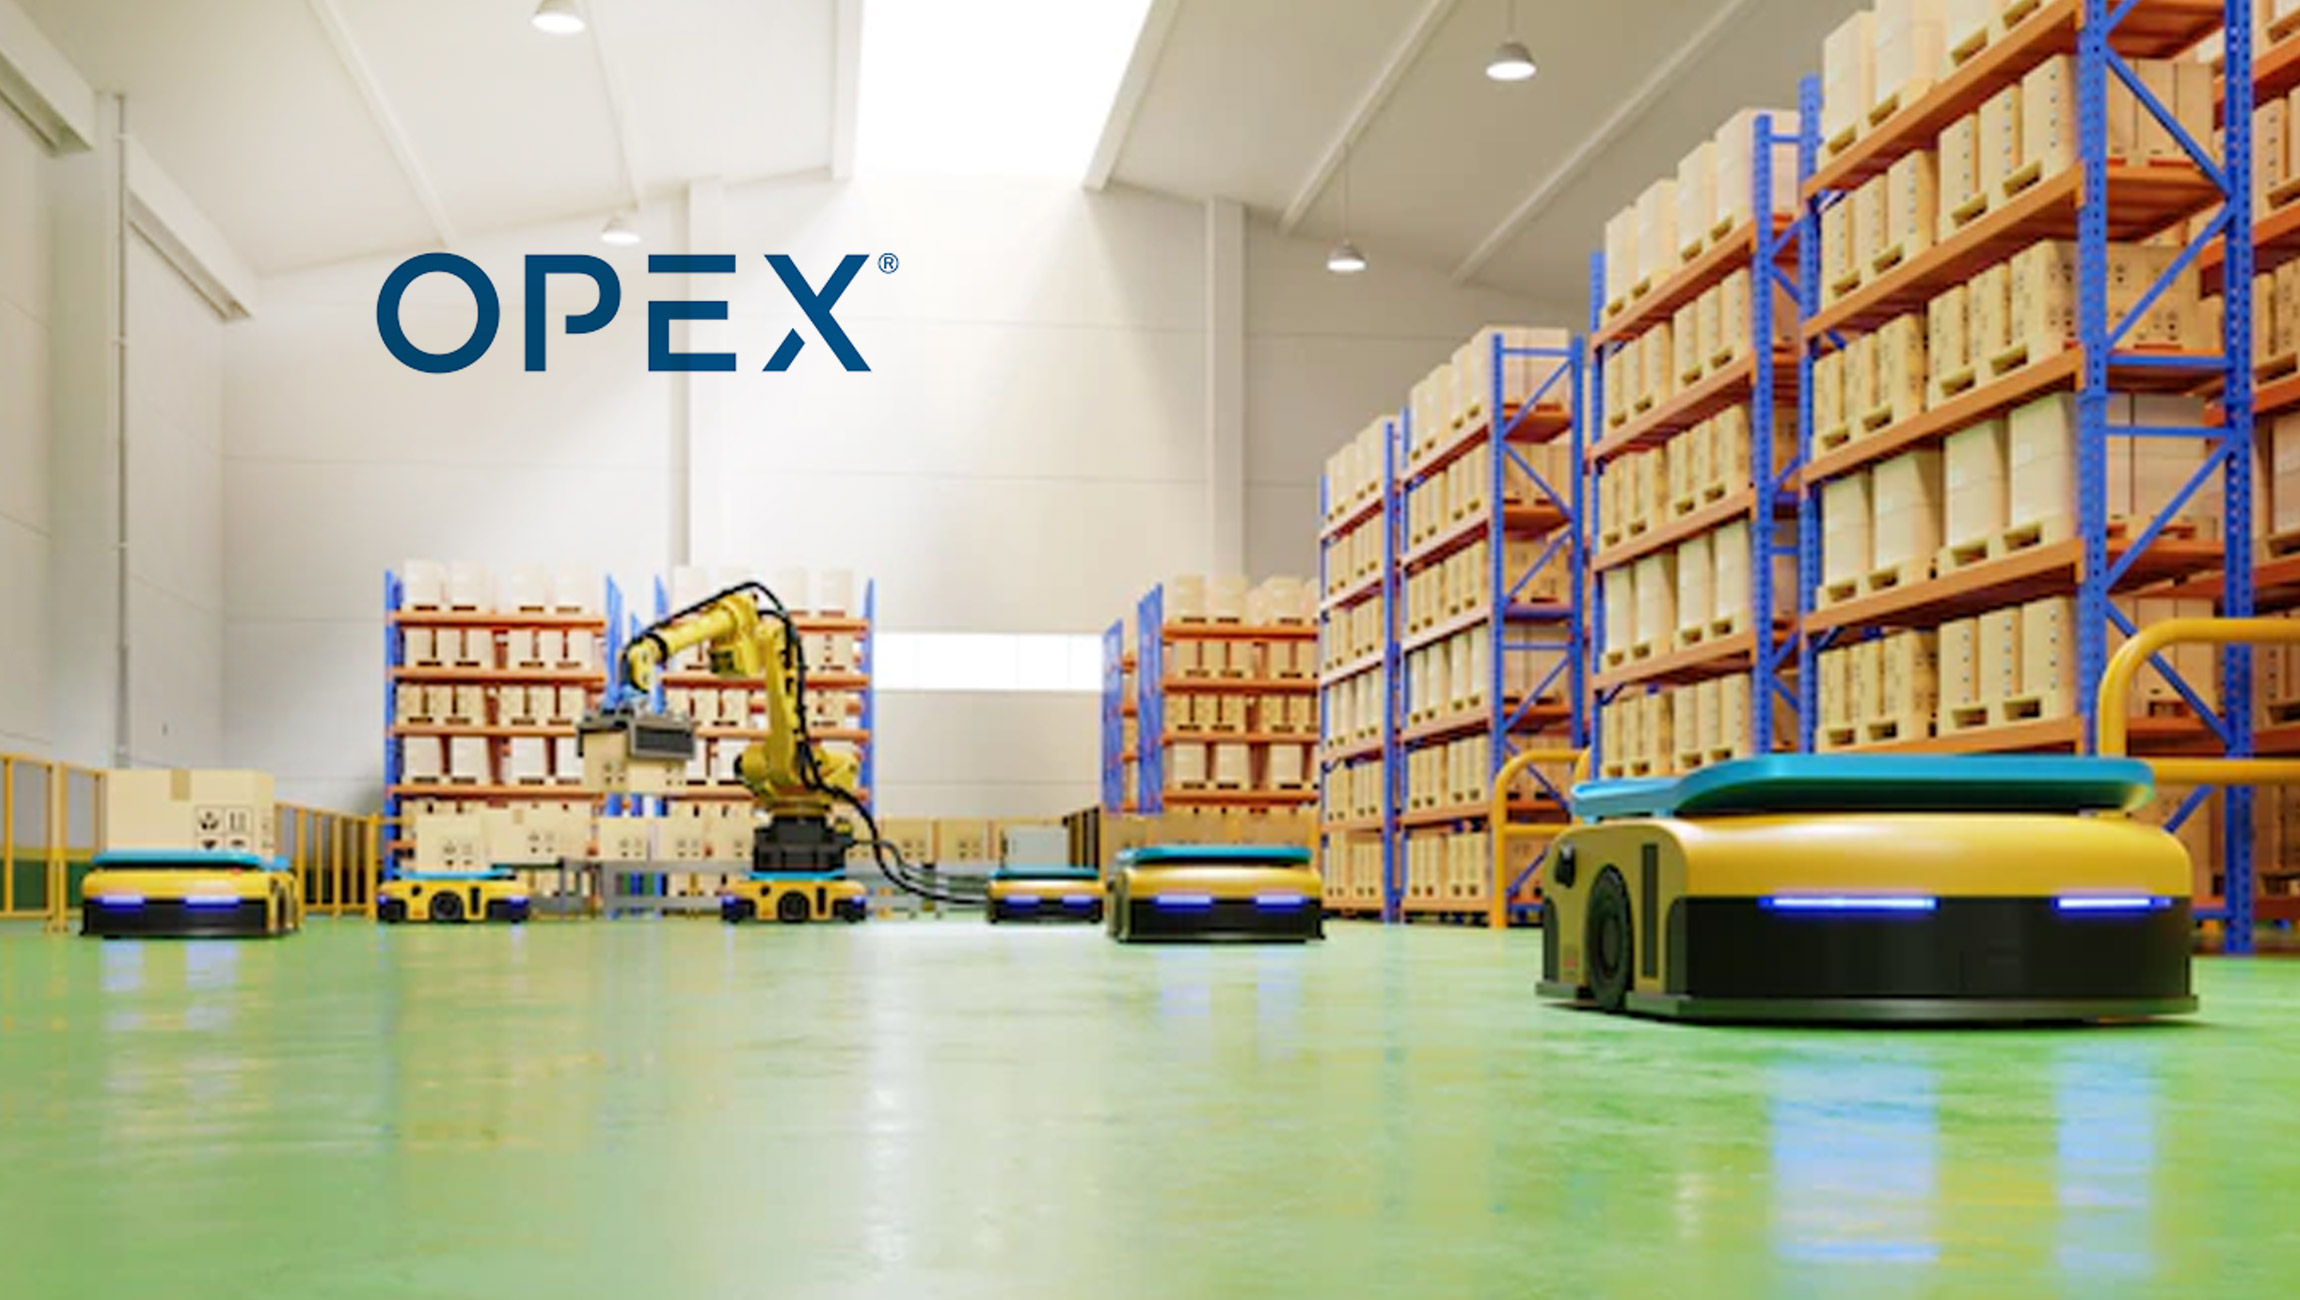 OPEX Opens a New Office and Showroom for Document and Mail Automation Solutions